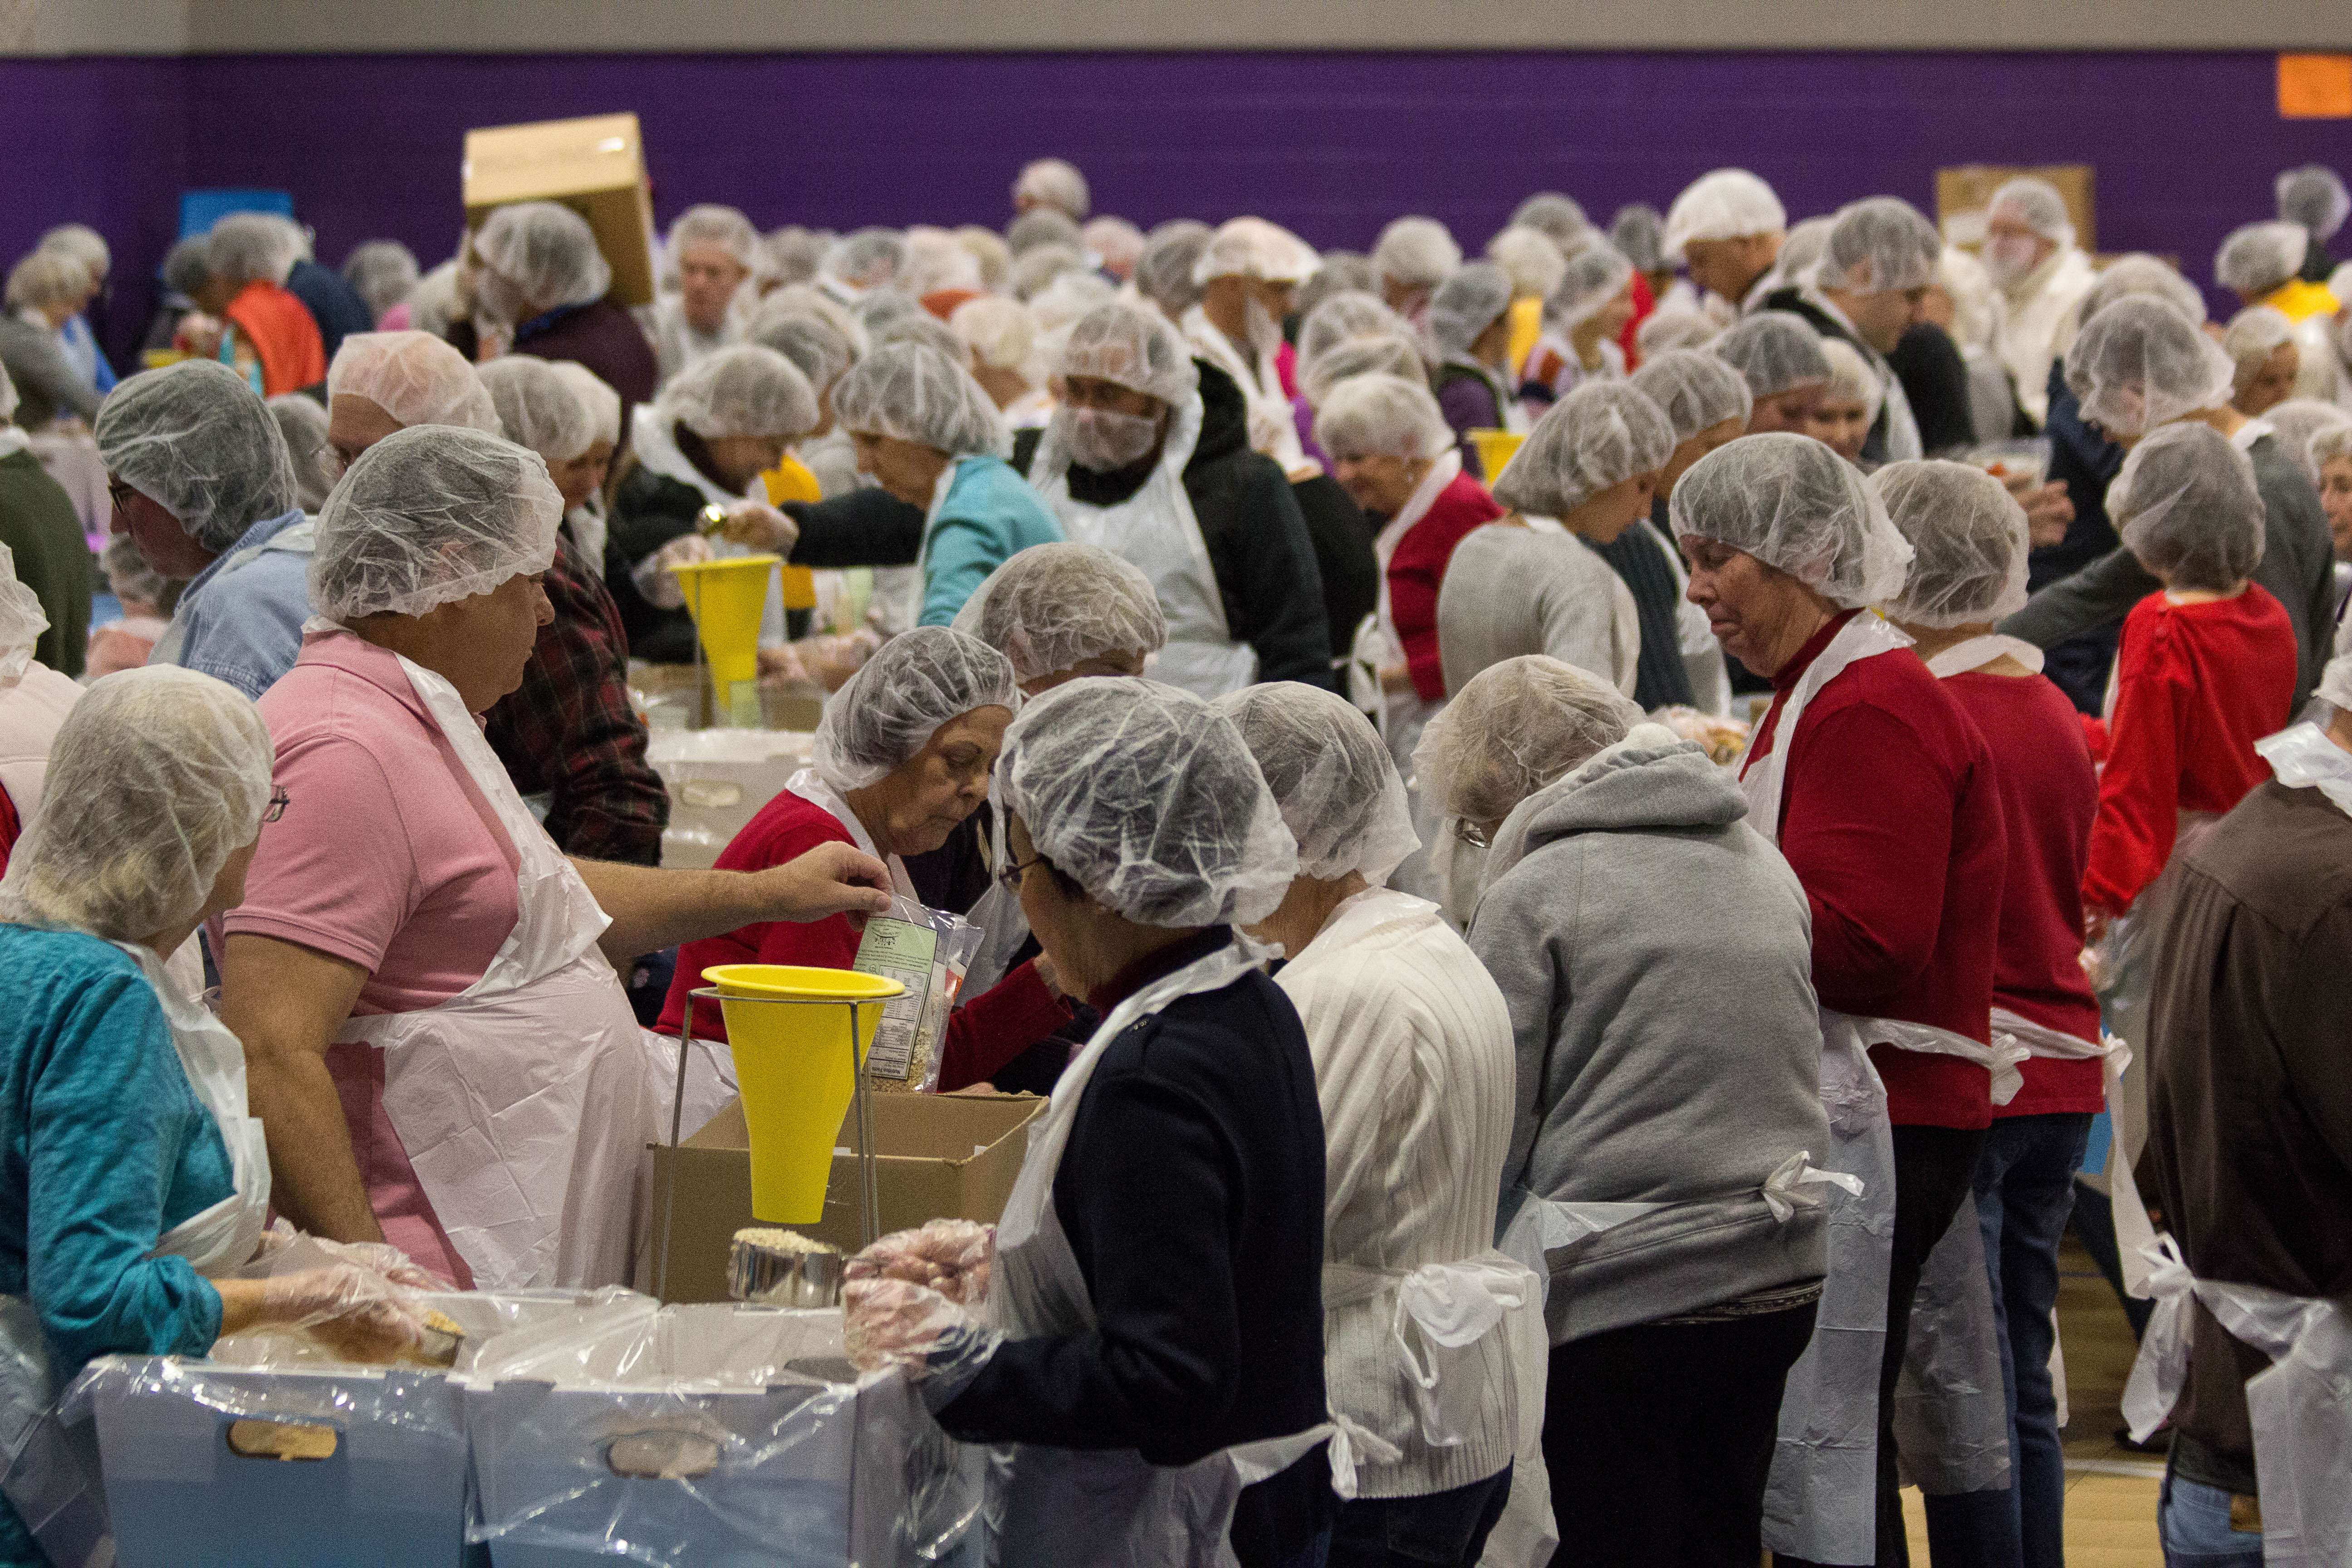 St. Paul's and community members pack meals for the hungry in Tucson.